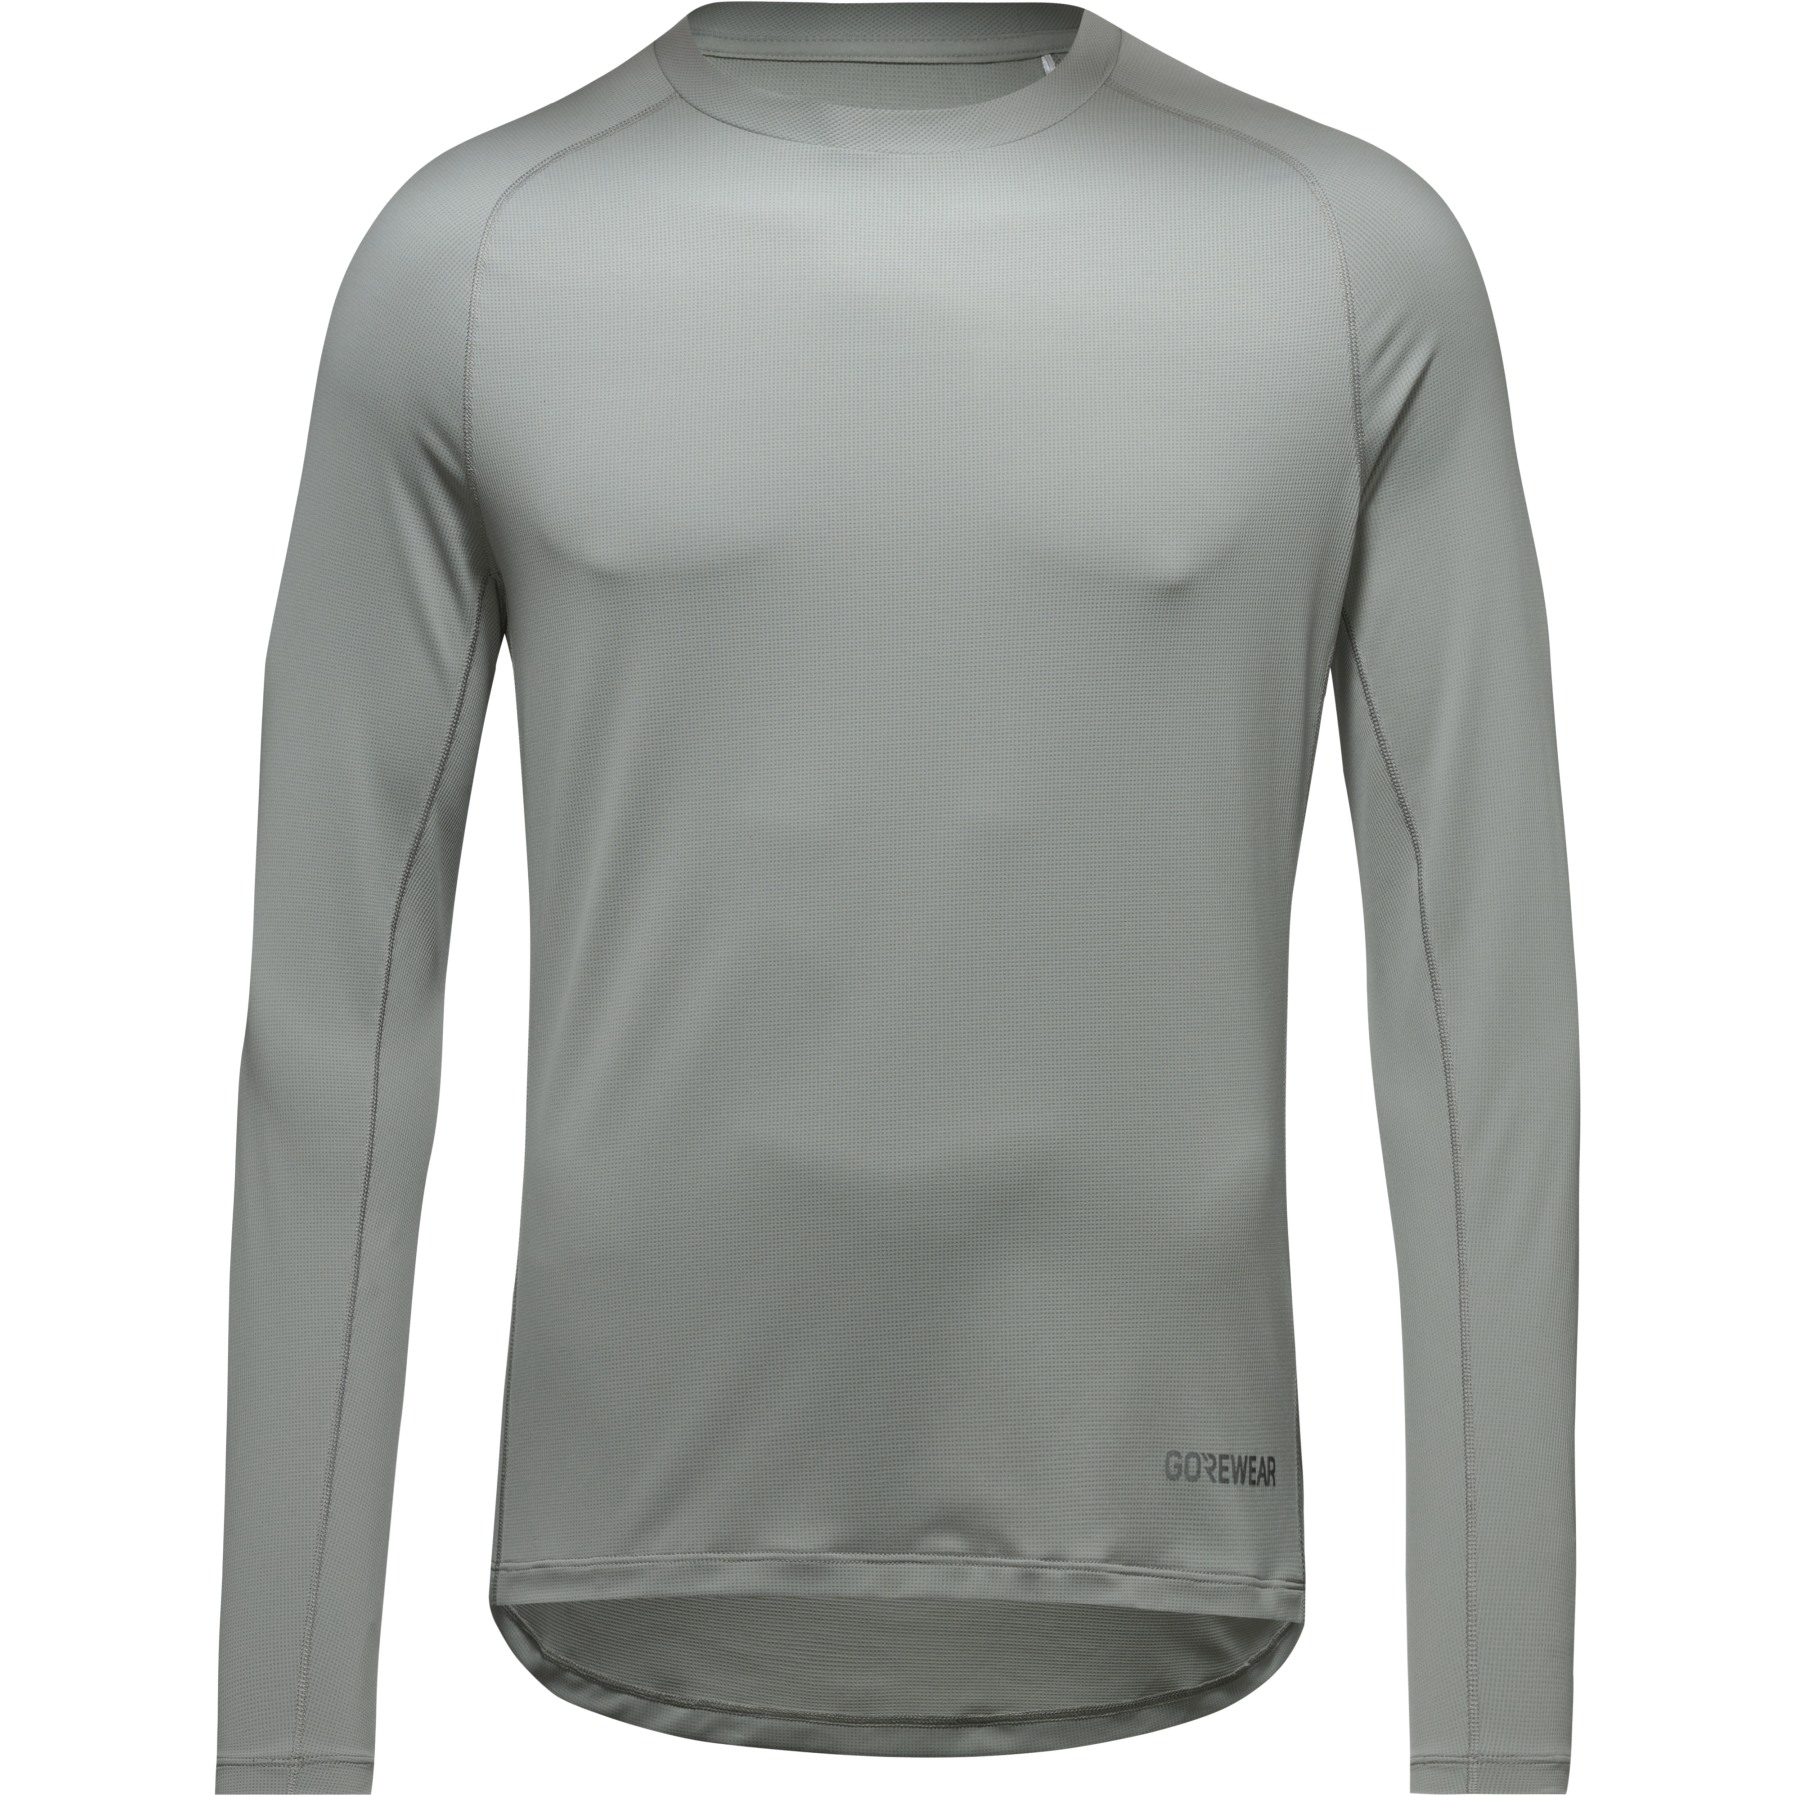 Picture of GOREWEAR Everyday Long Sleeve Shirt Men - lab gray BF00